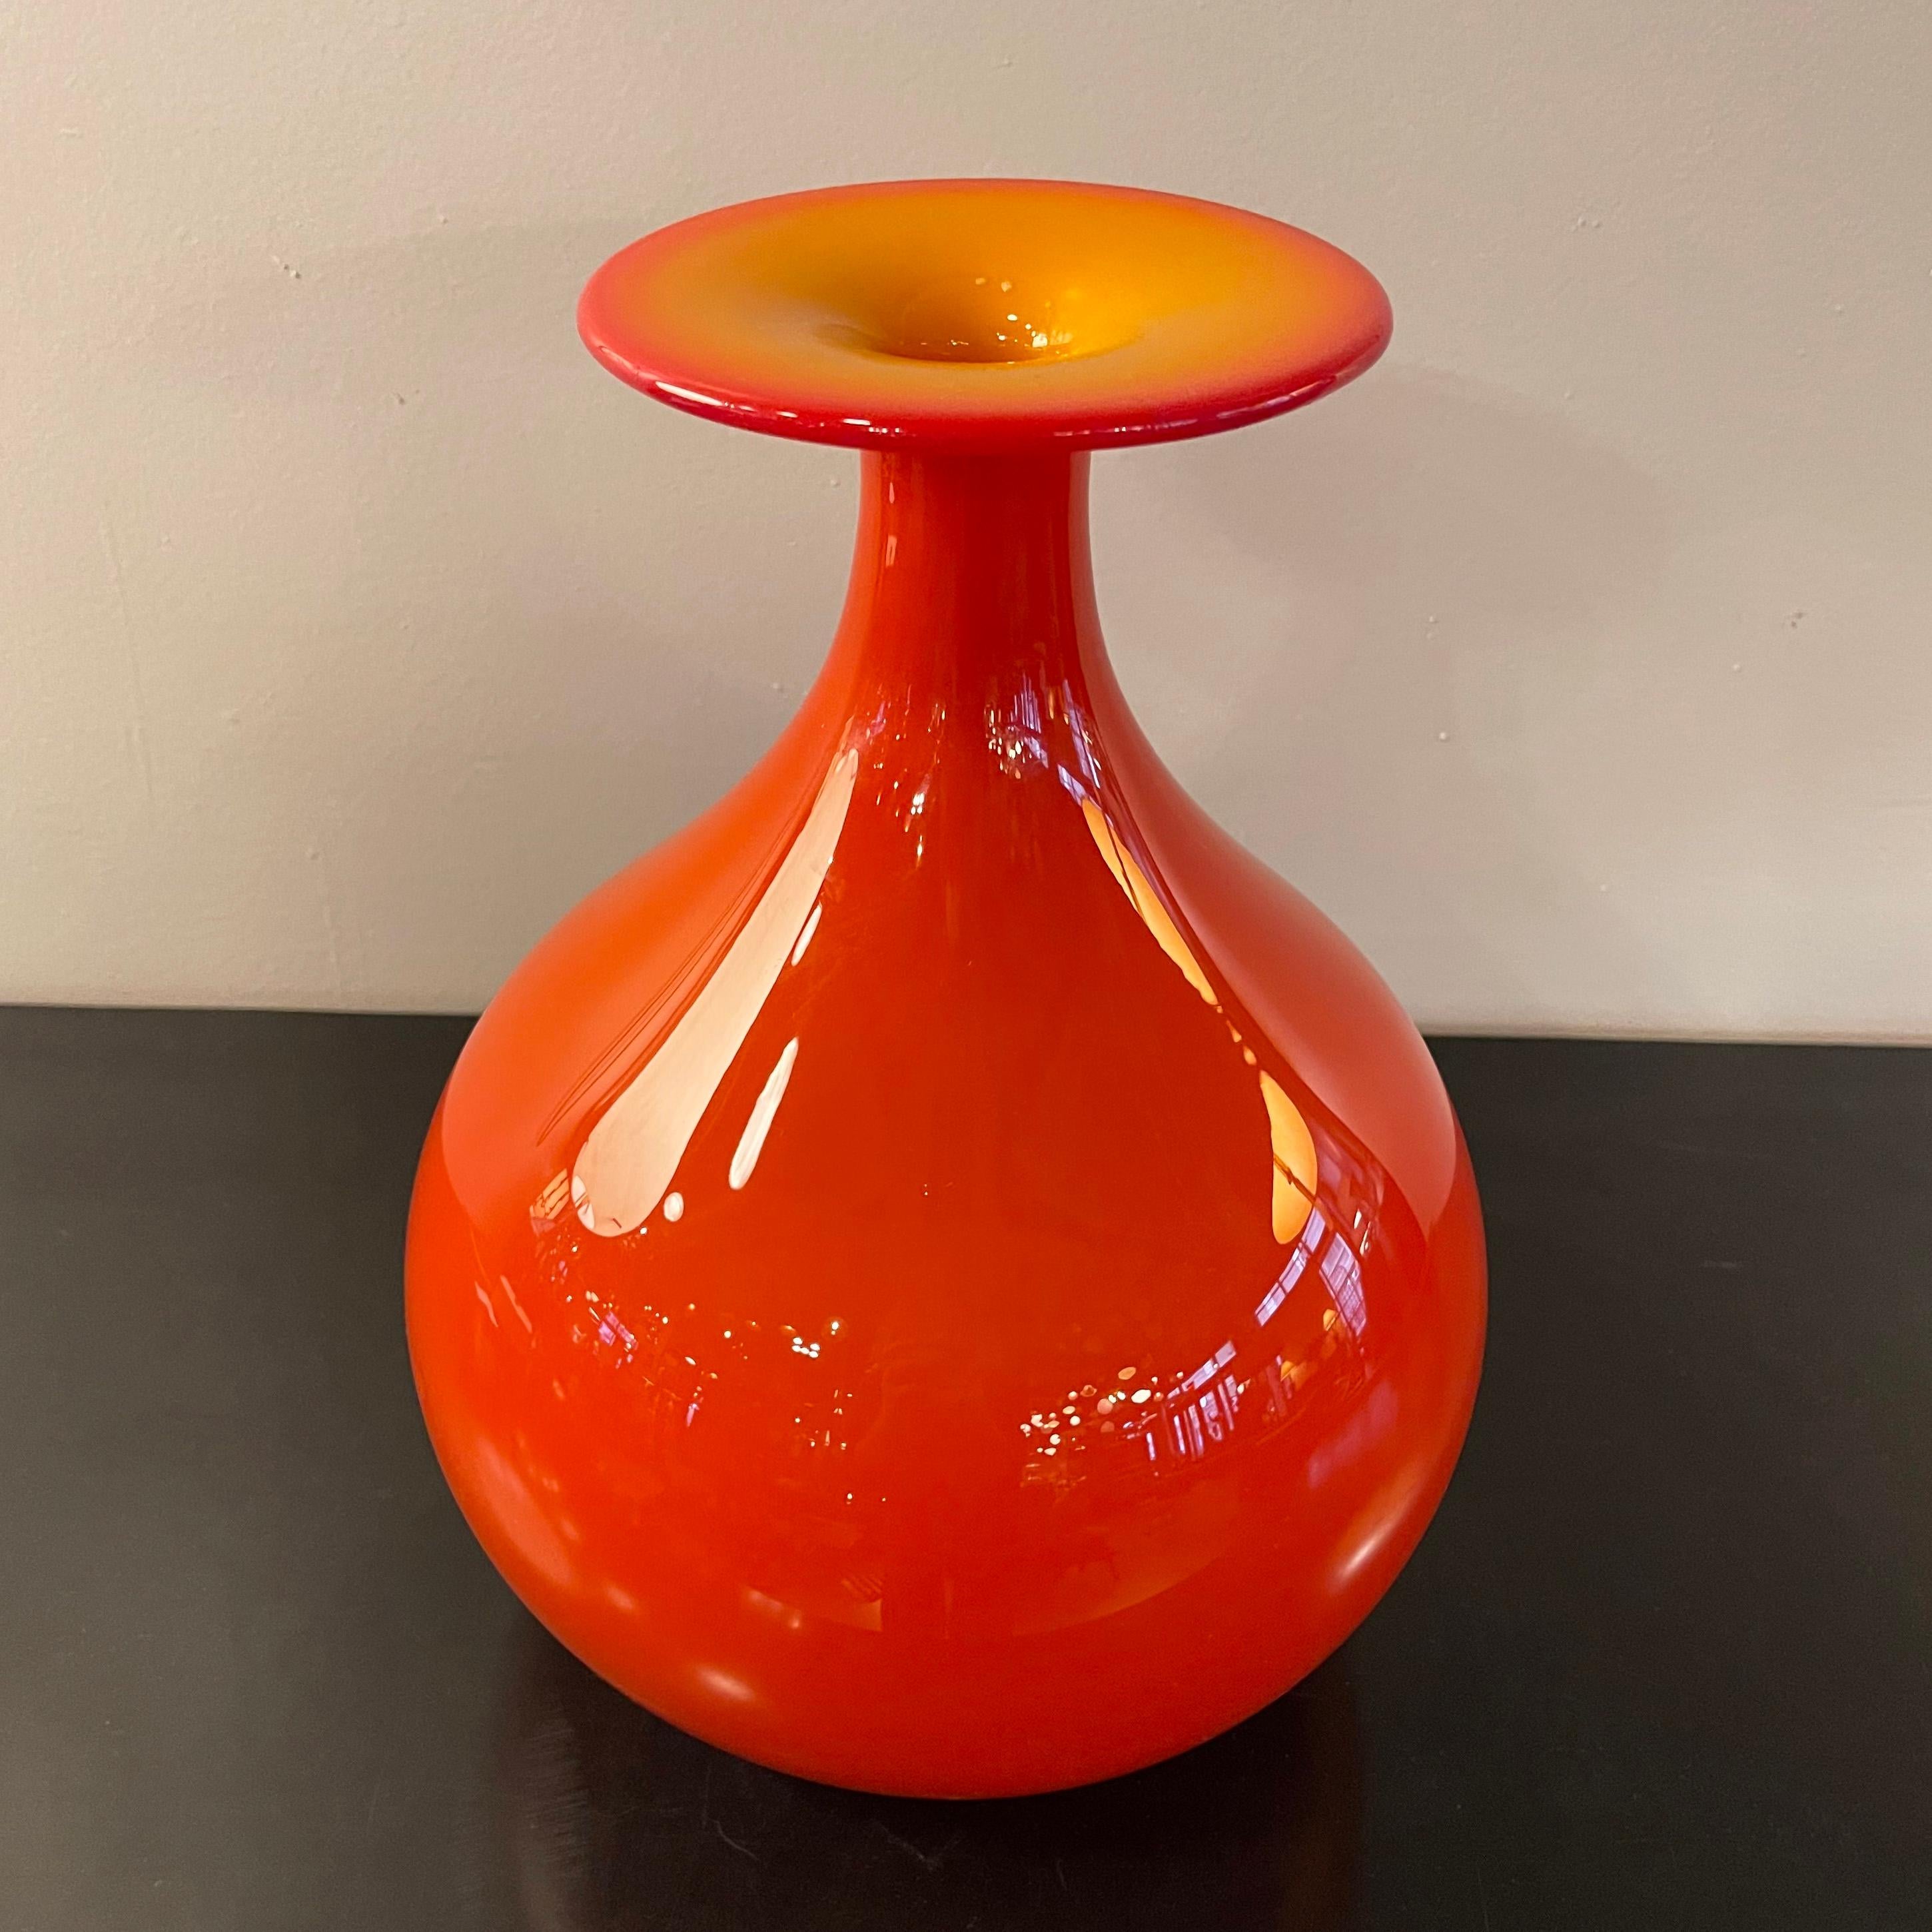 Mid century modern, art glass vase by Tom Connally for Greenwich Flint Craft in brilliant, opaque orange with contrasting orange ochre top. The mouth opening measures 1 inch.